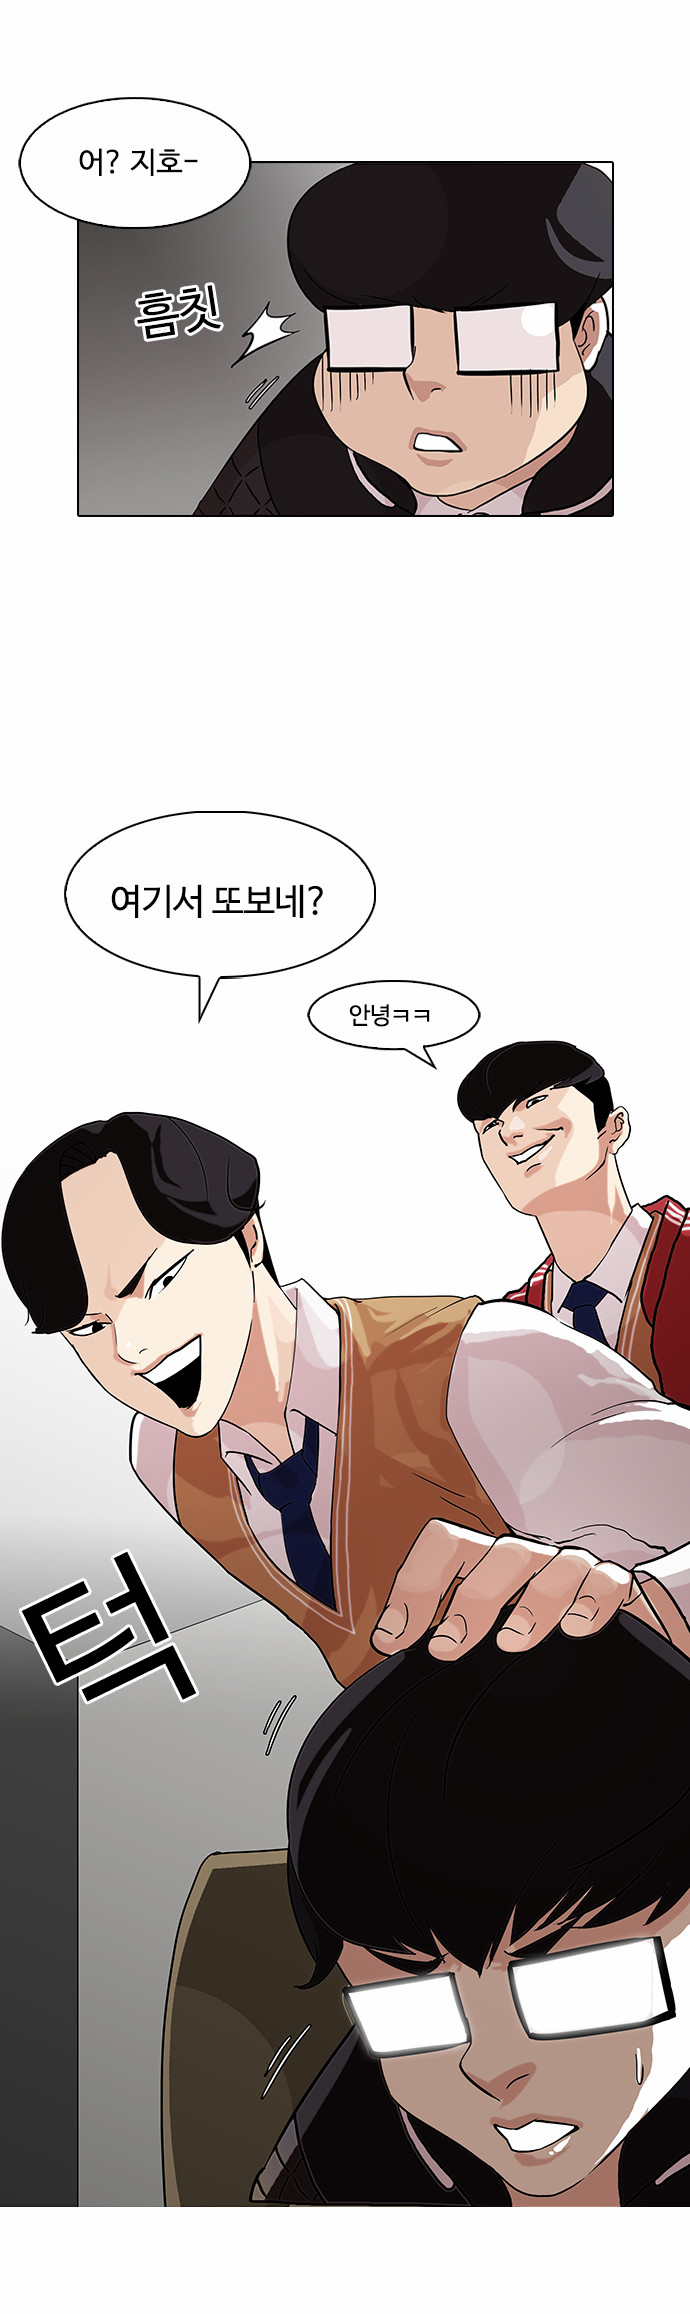 Lookism - Chapter 83 - Page 3